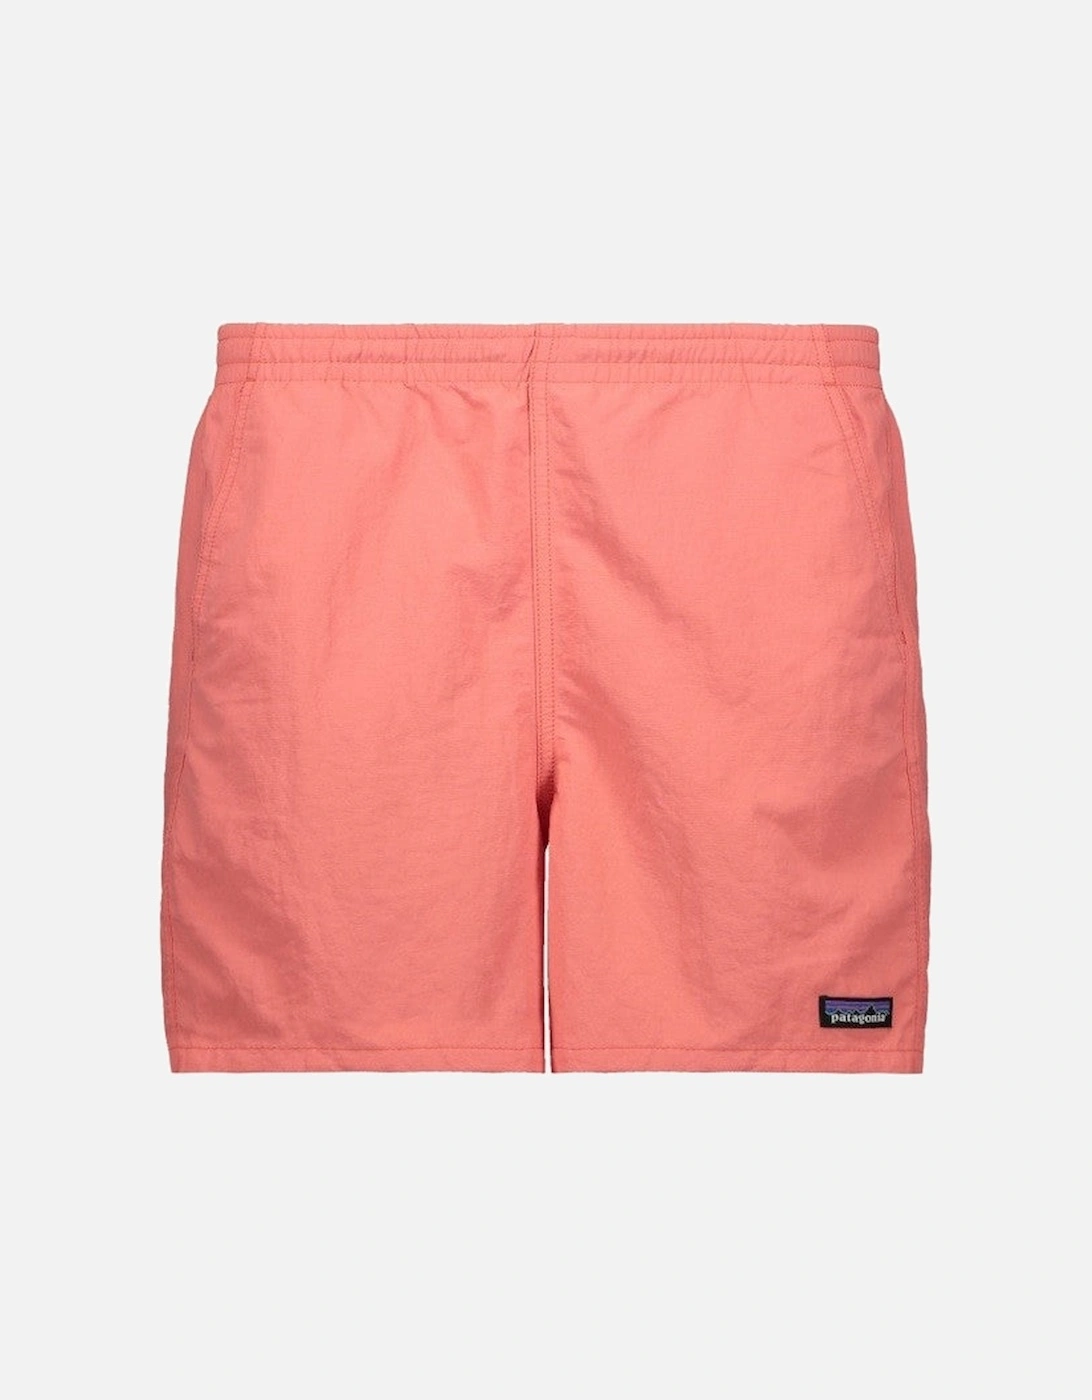 Women's Baggies Shorts - Coral, 4 of 3